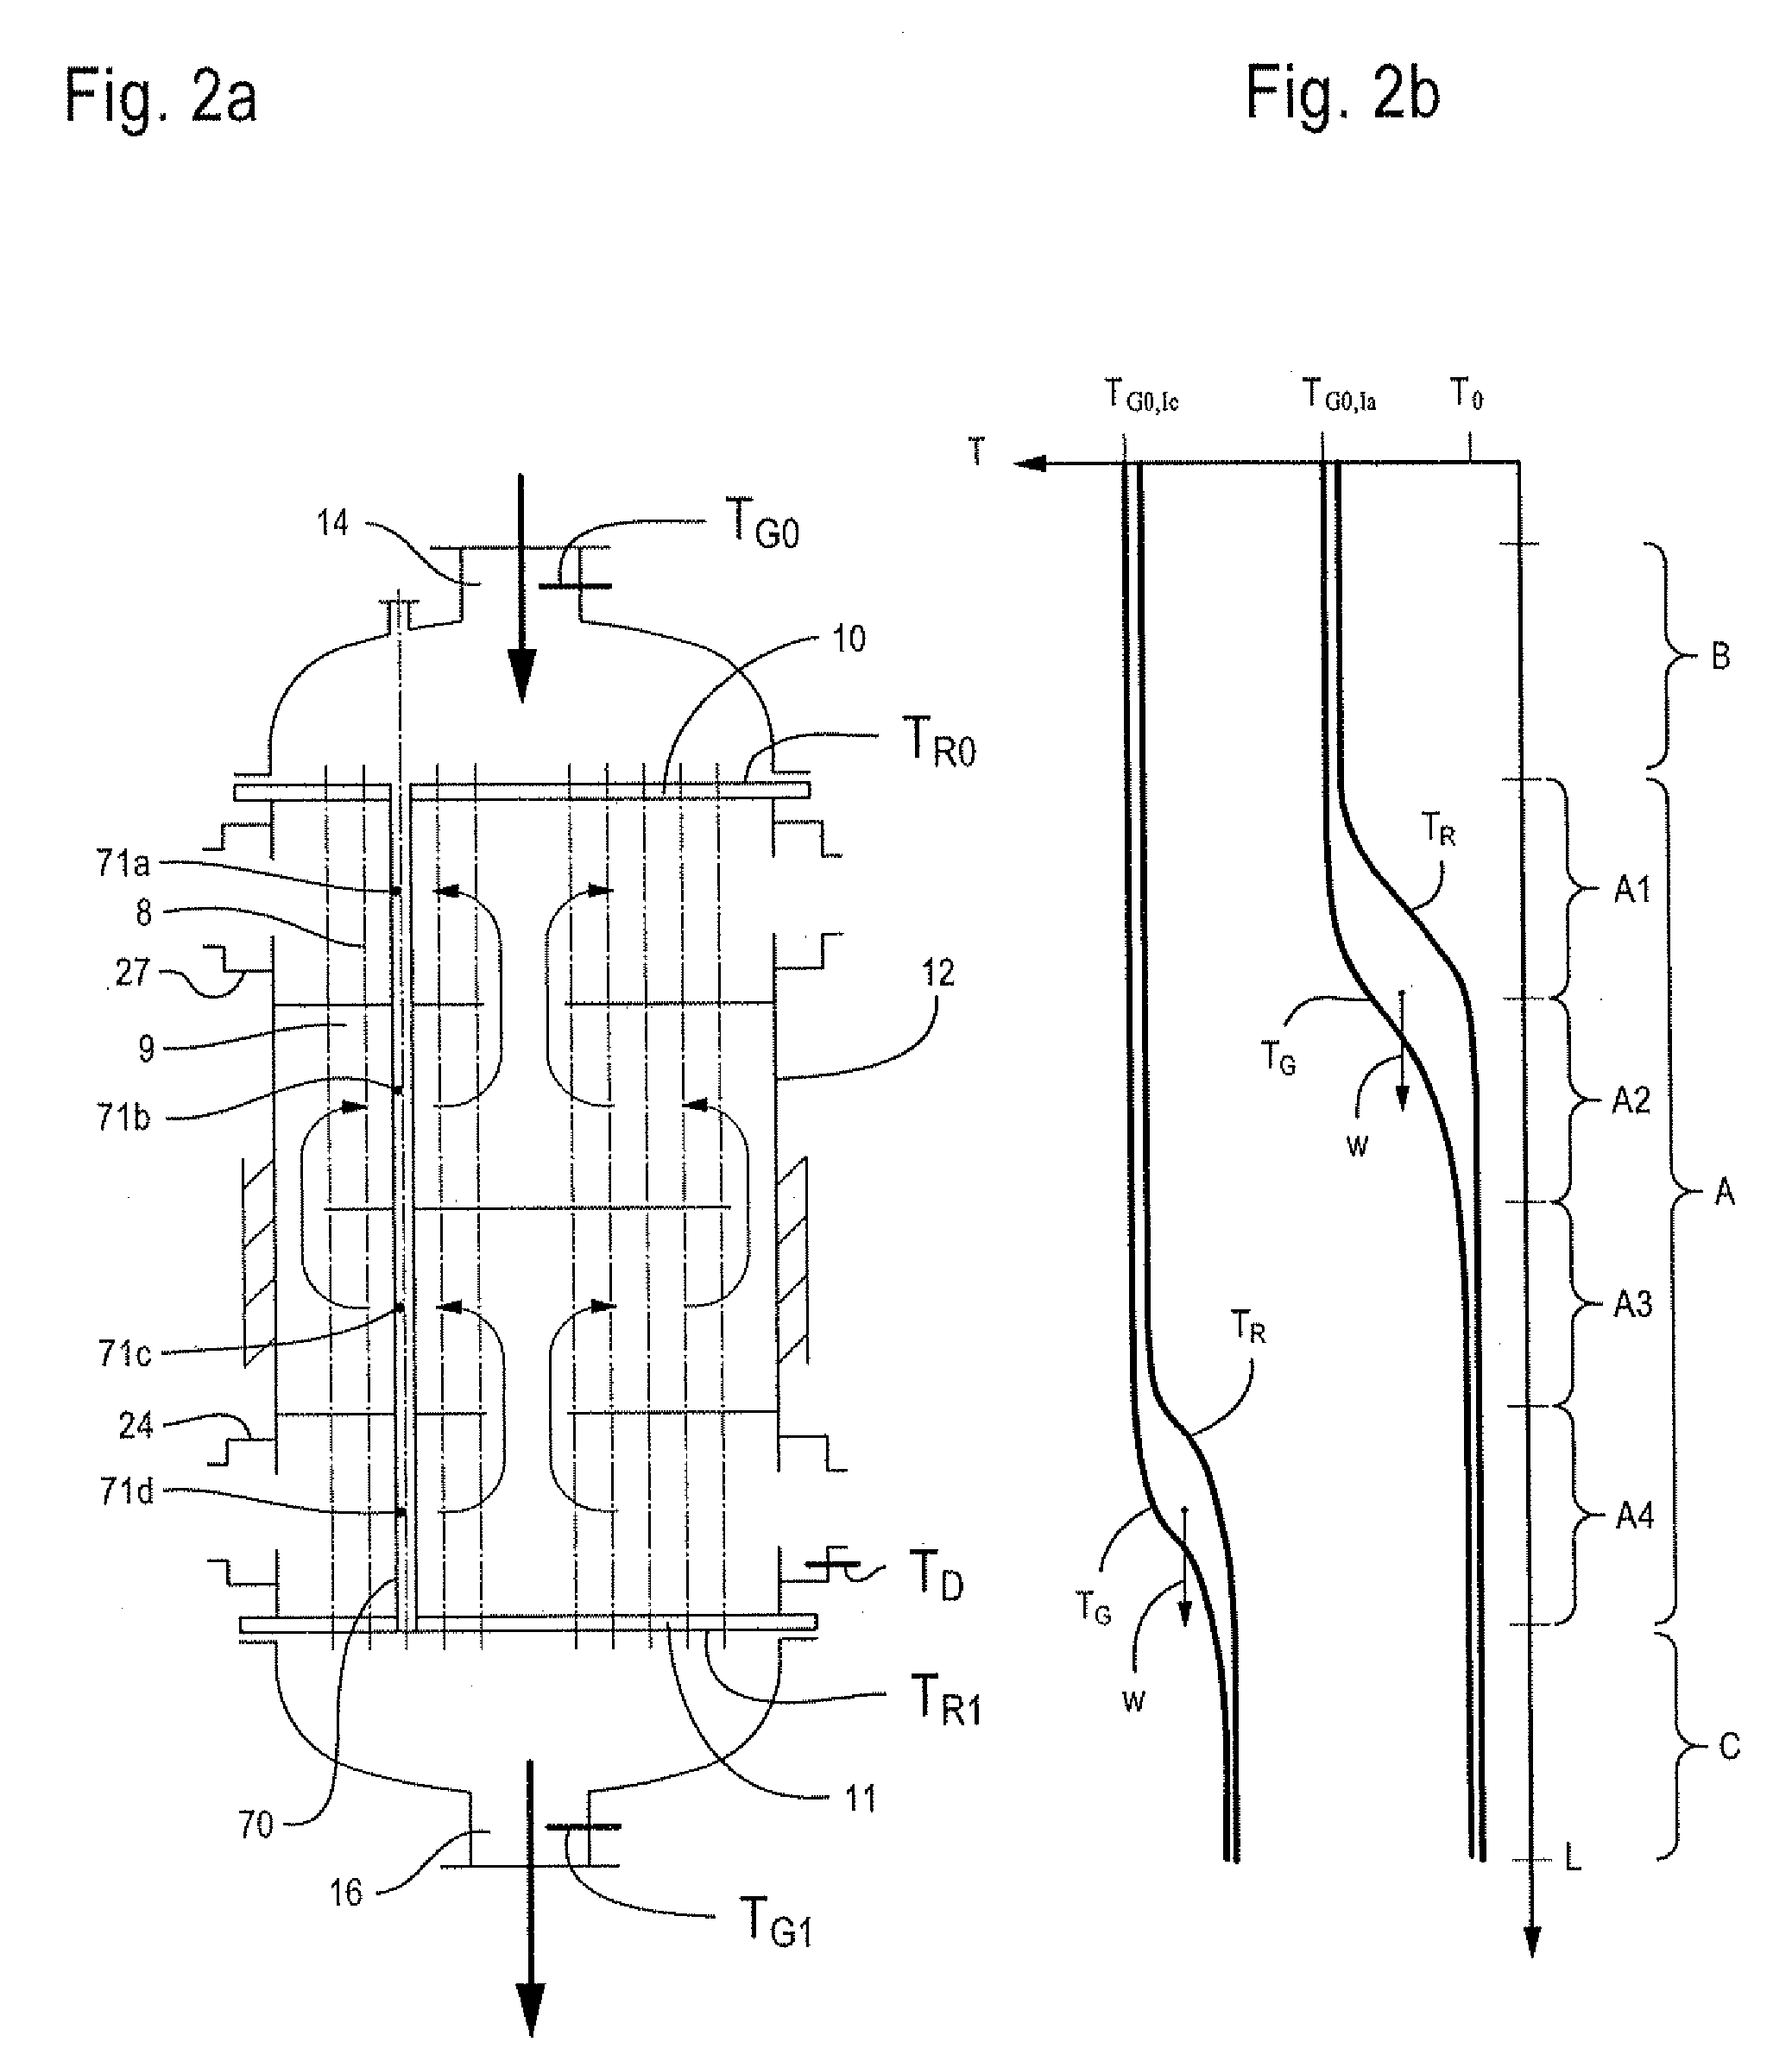 Method of varying the temperature of a tube bundle reactor